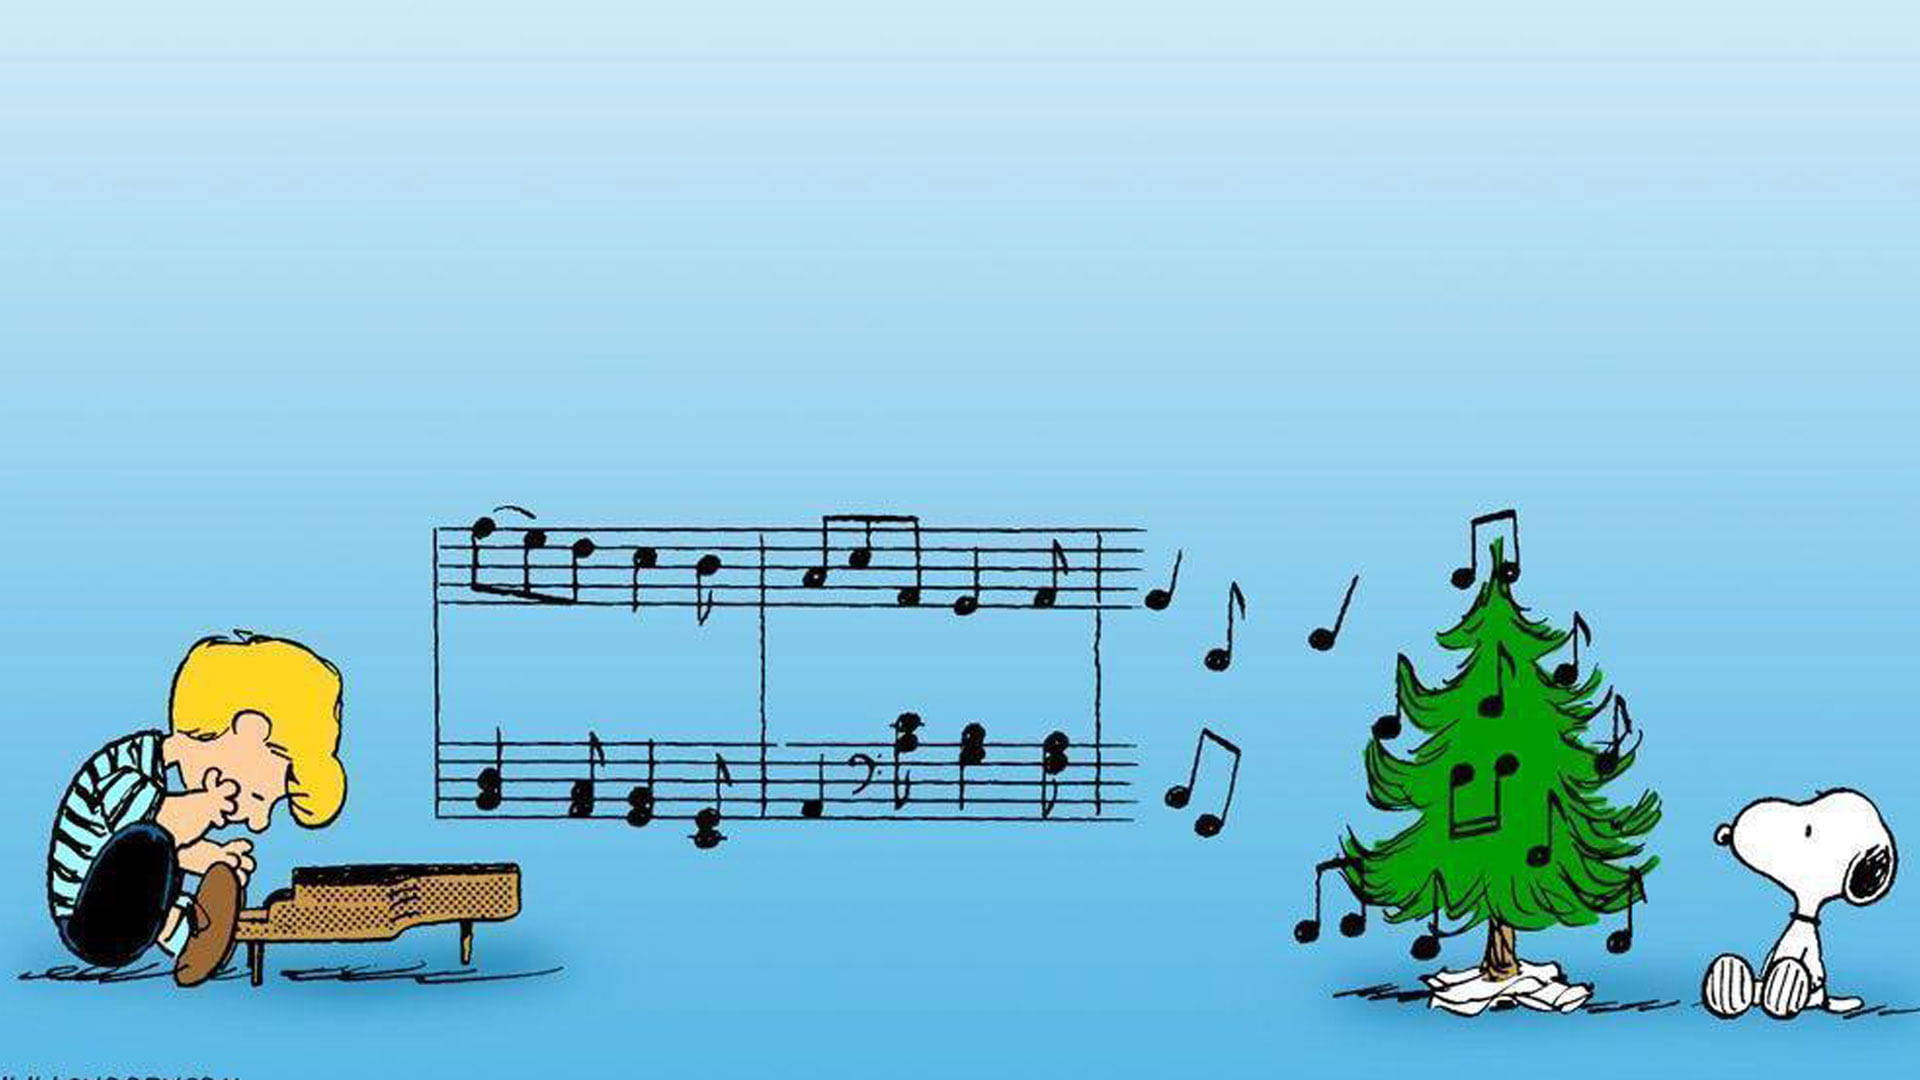 christmas music notes background